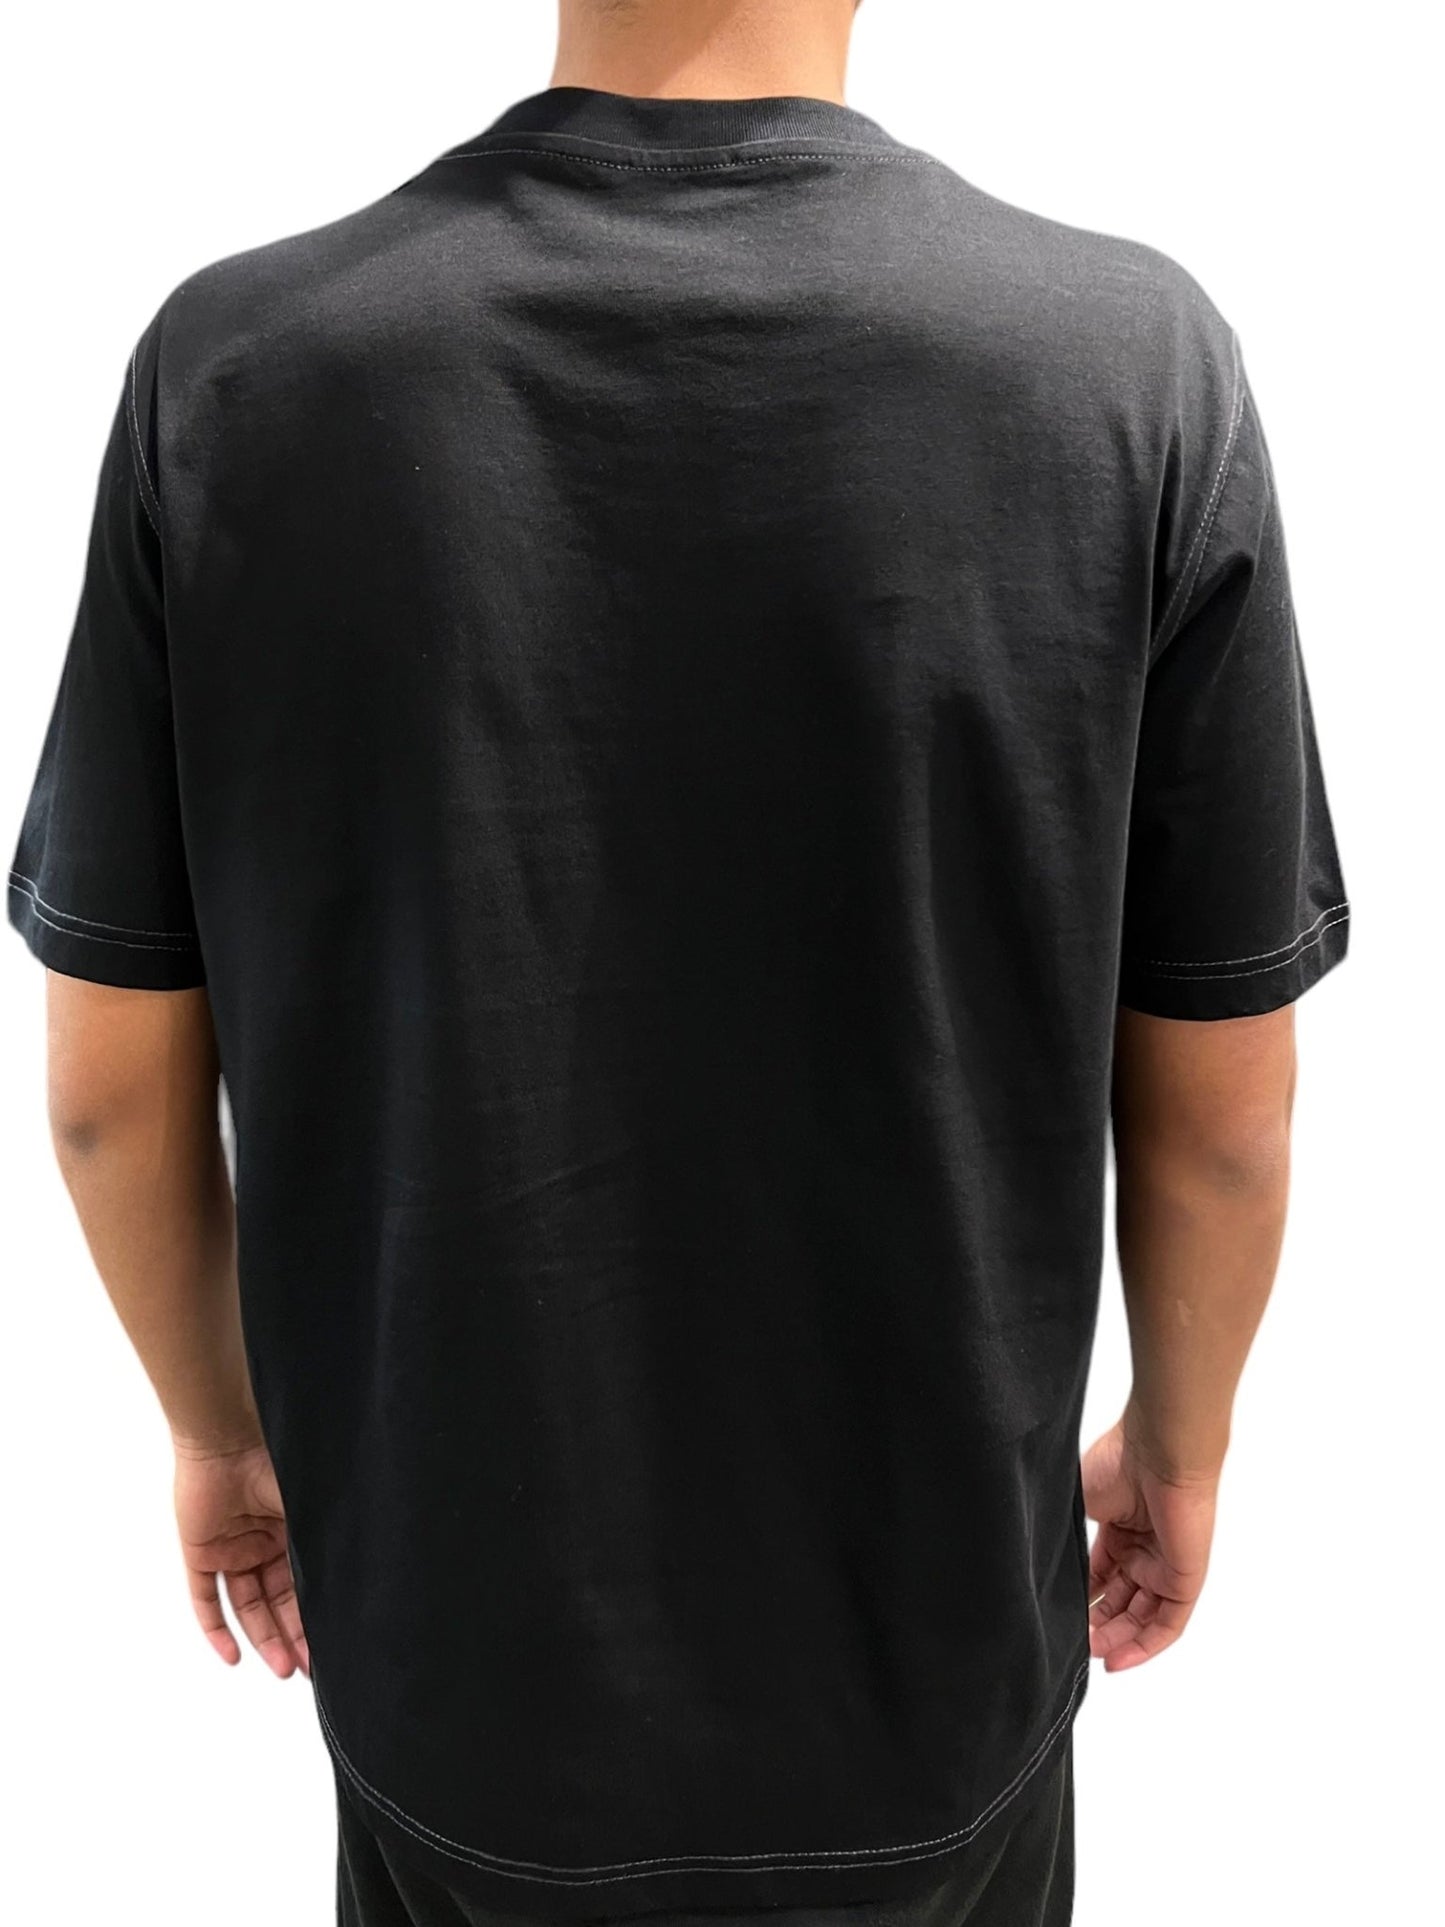 Rear view of a person wearing a DIESEL T-JUST-N14 T-SHIRT BLACK made from organic cotton jersey.